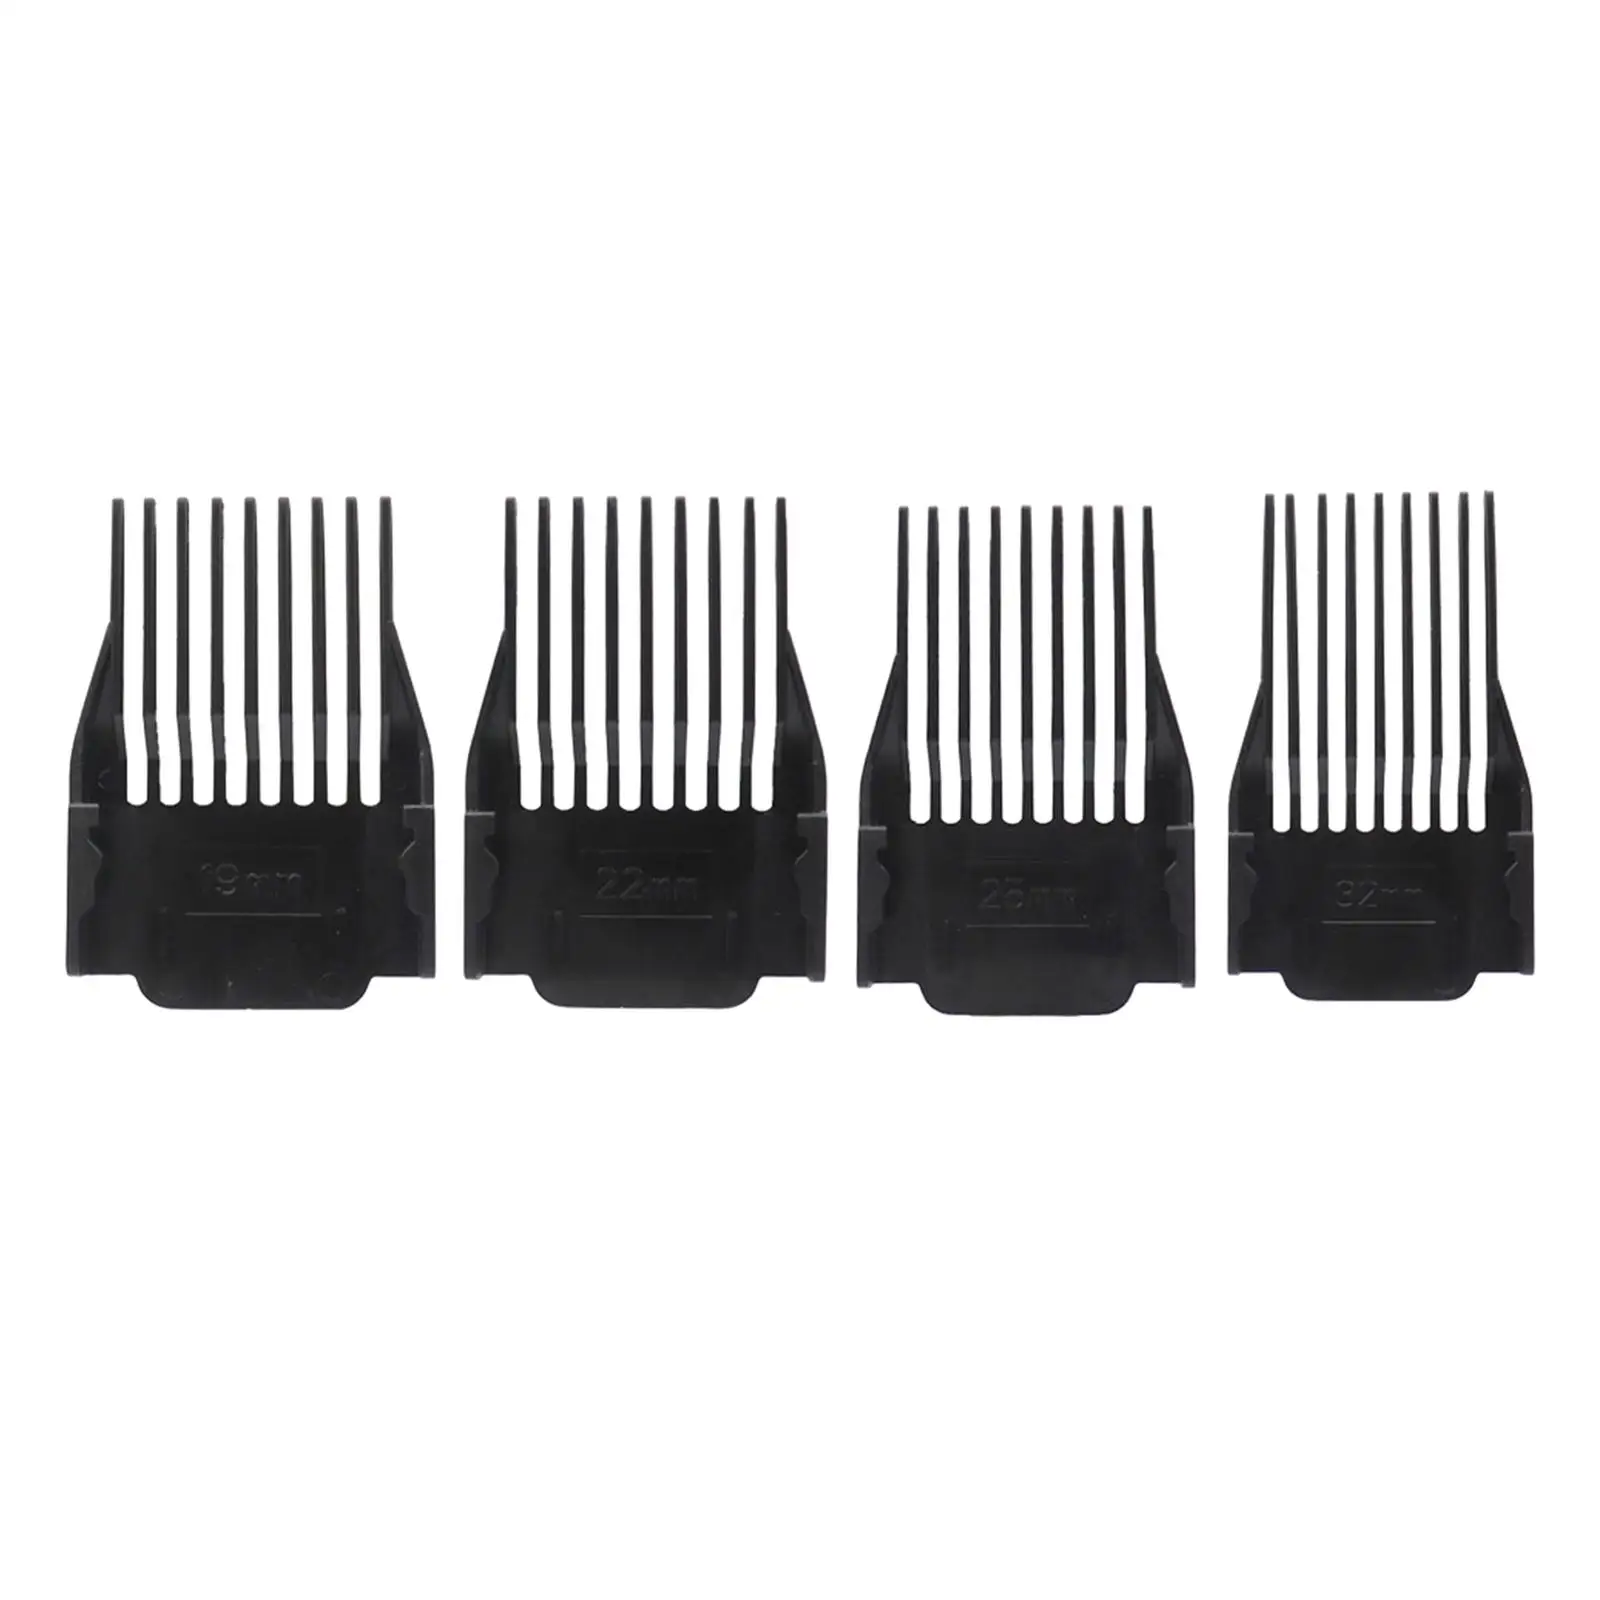 4Pcs Hair  Combs Hair  Combs Professional Universal Hair Limit Comb for Hair Clippers/s Stylists and Barbers